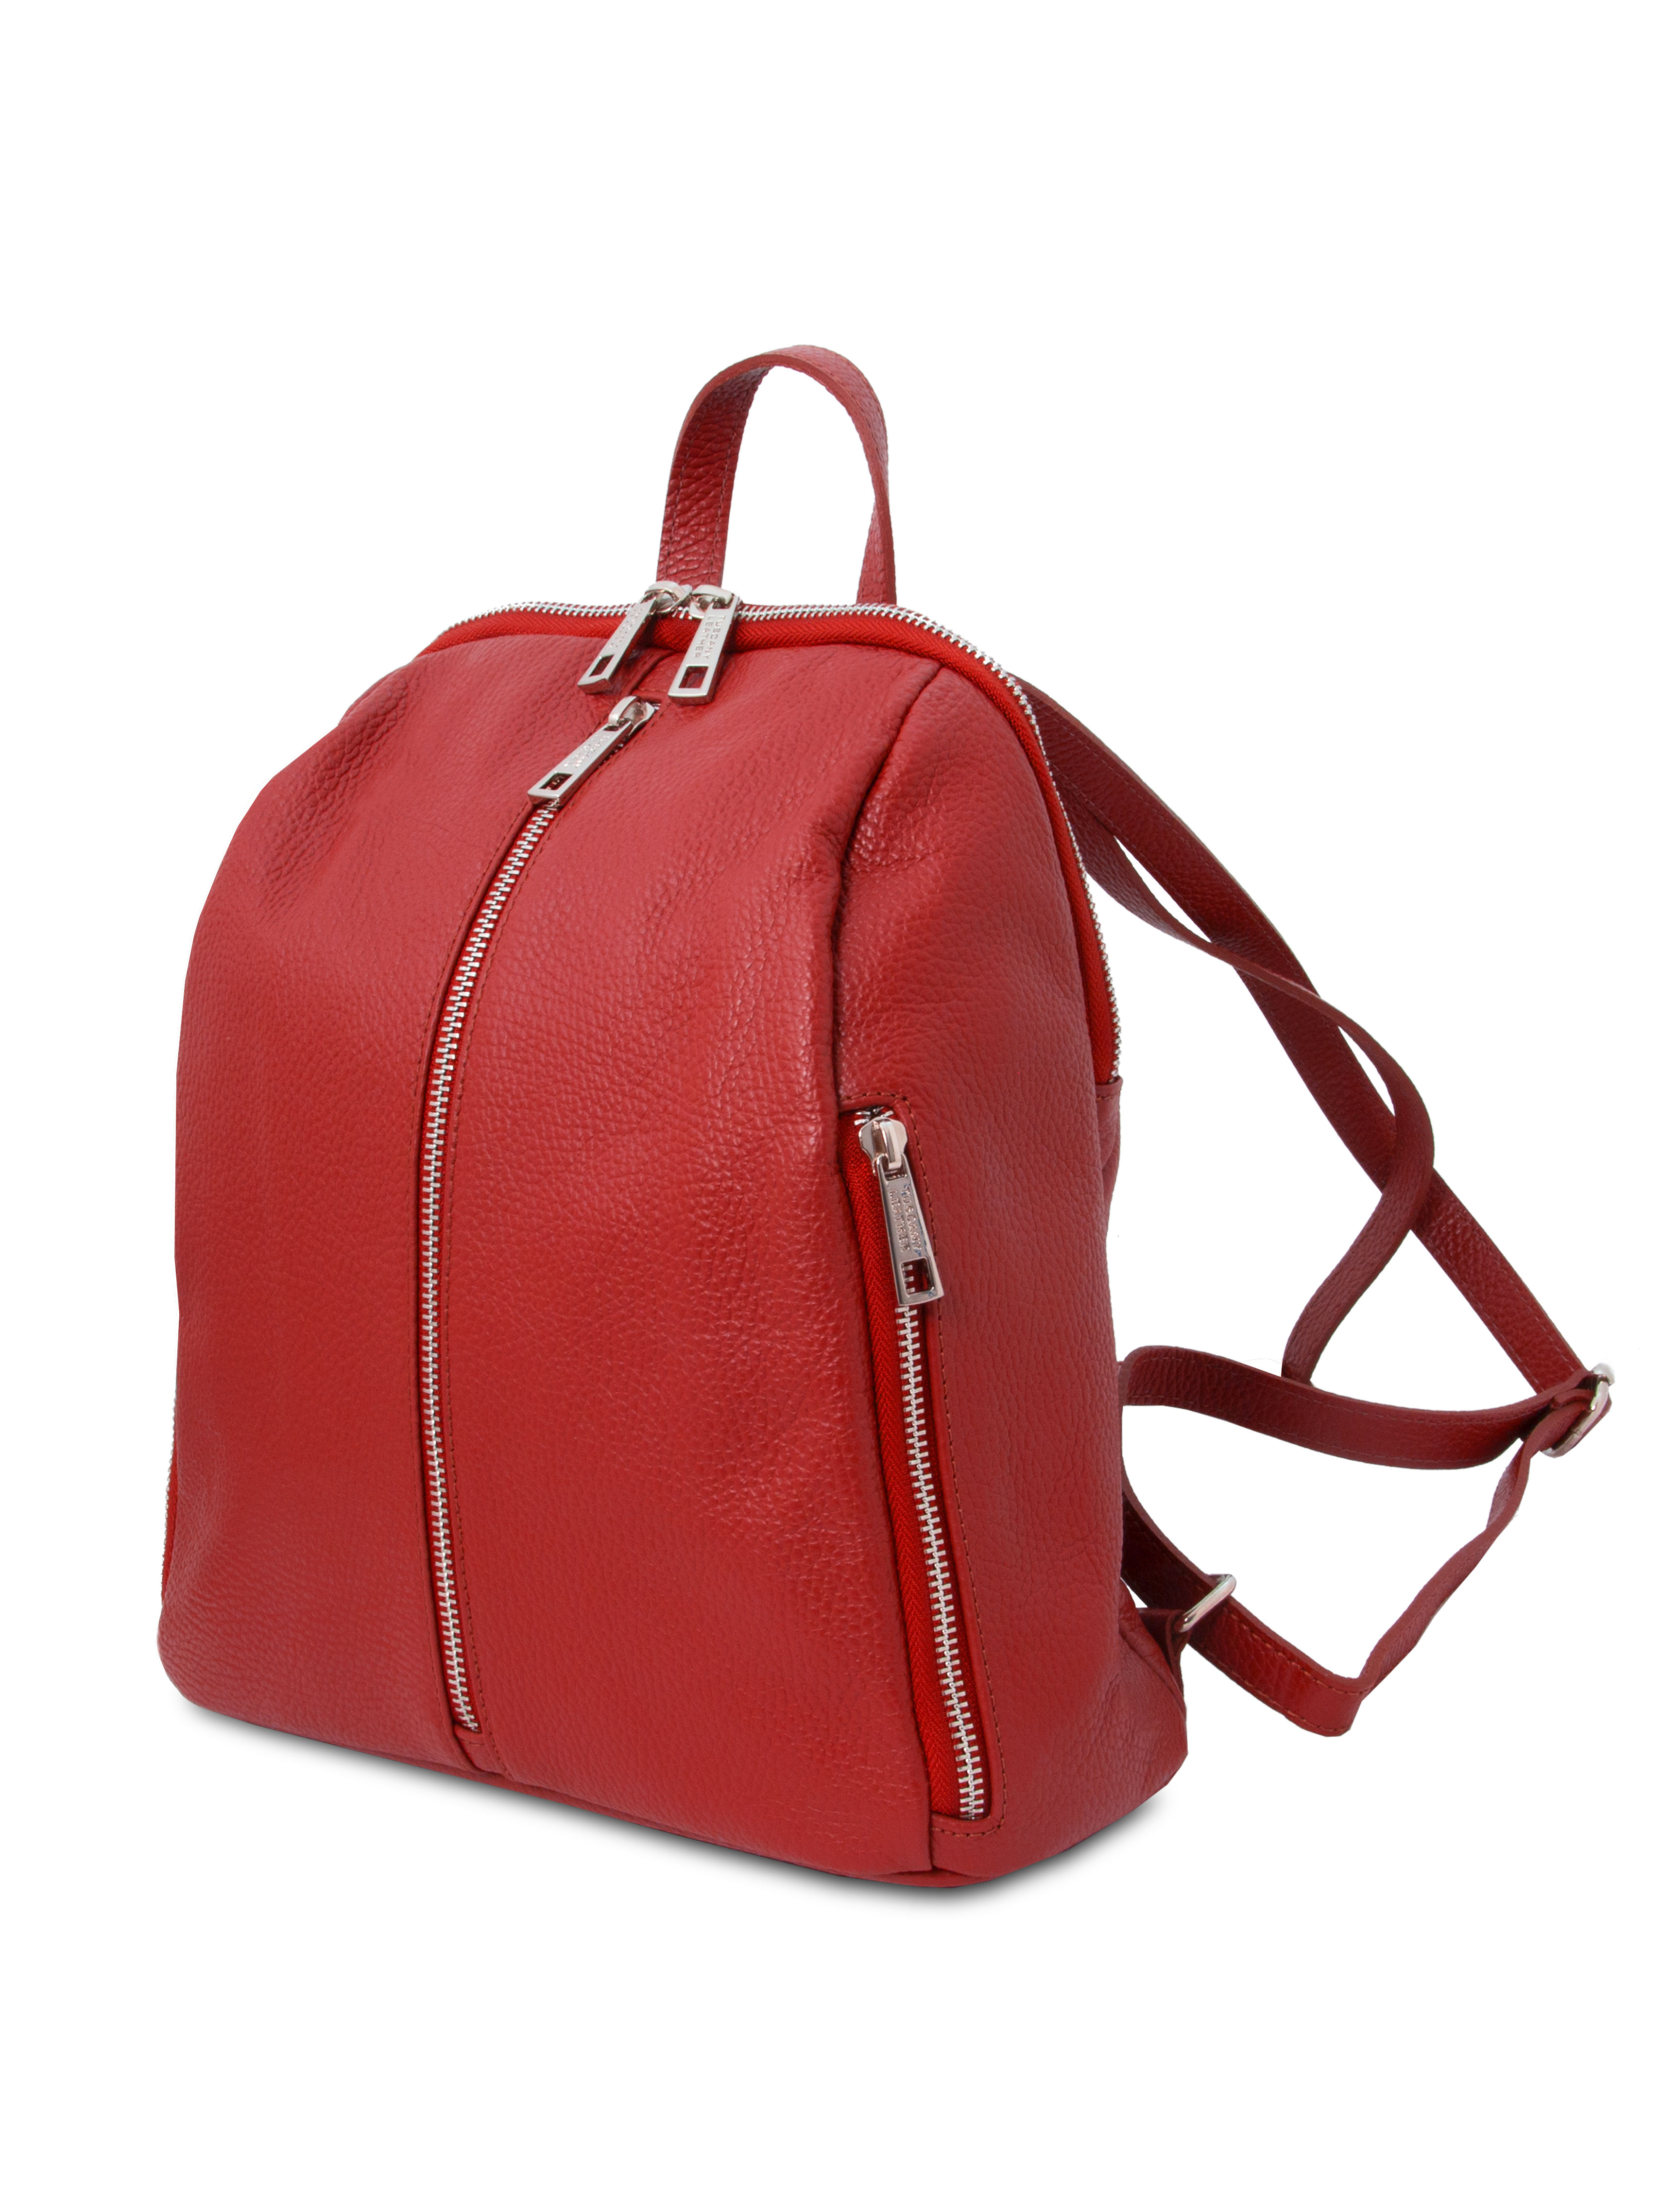 disinfectant 鍔 Mobilize Rucsac dama din piele naturala rosie, Tuscany Leather, TL Bag